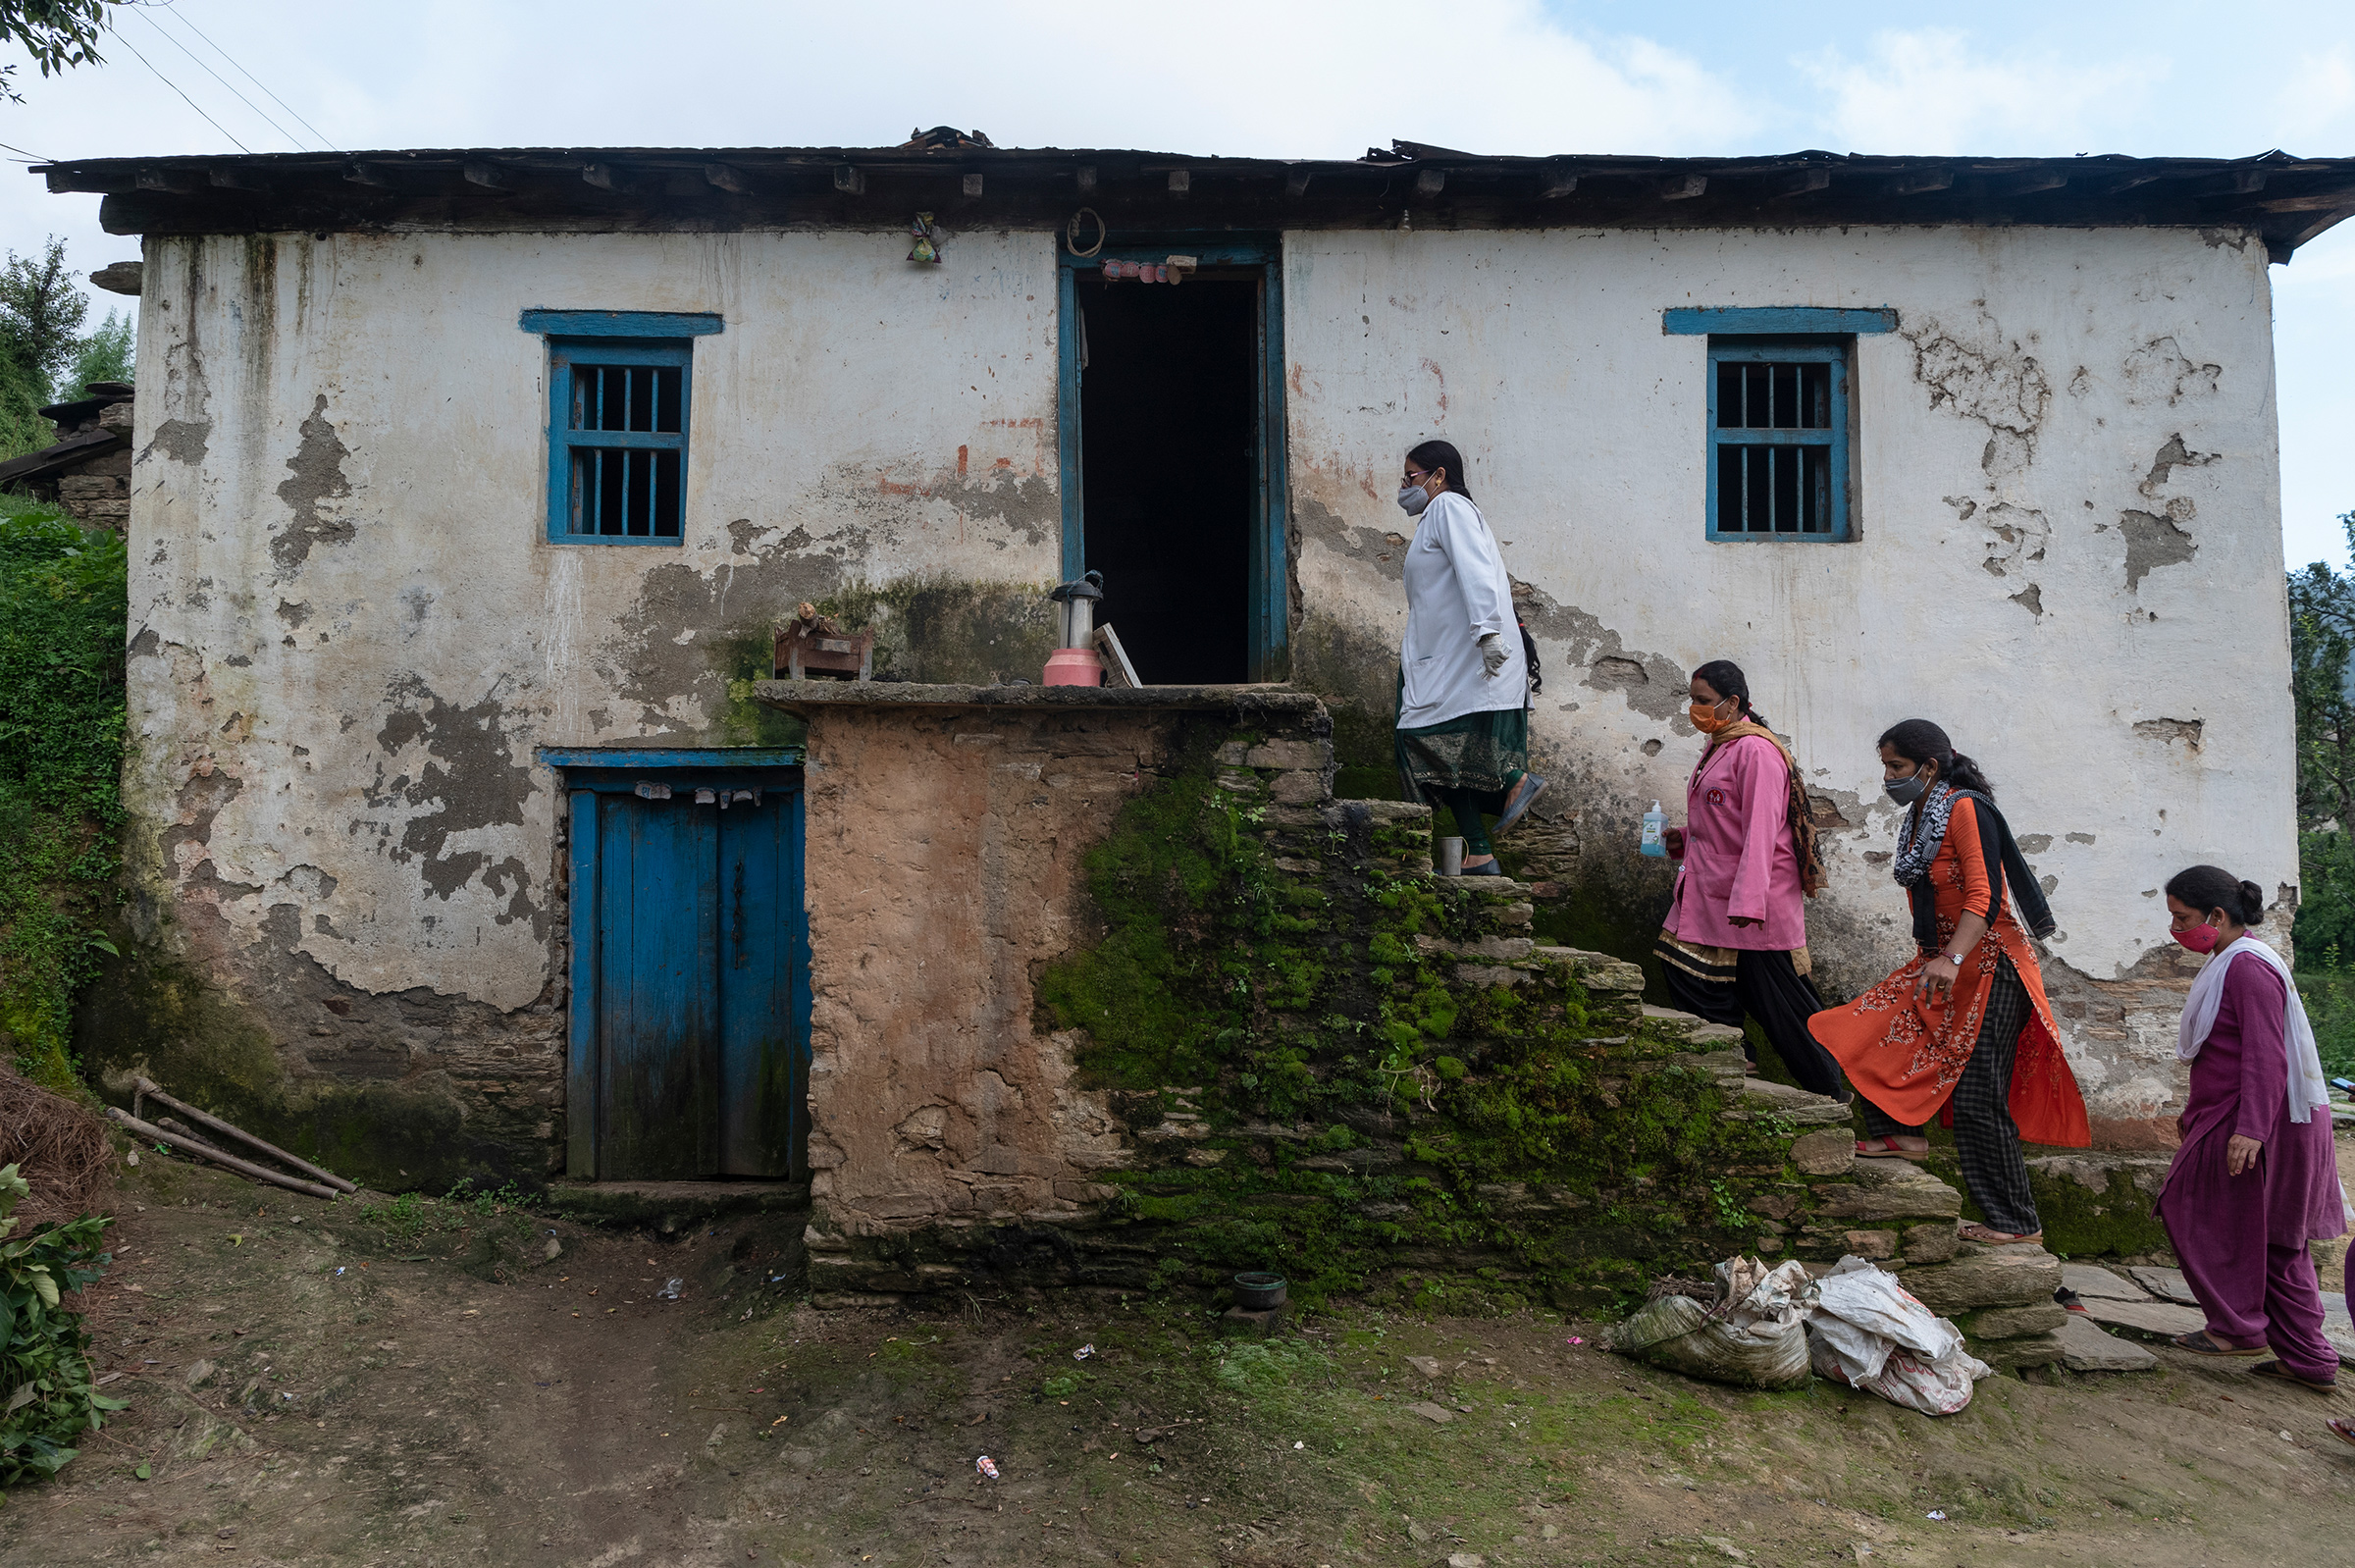 A mobile team led by Sharma, left, visits the home of a local who cannot make it to a vaccination center (Saumya Khandelwal for TIME)